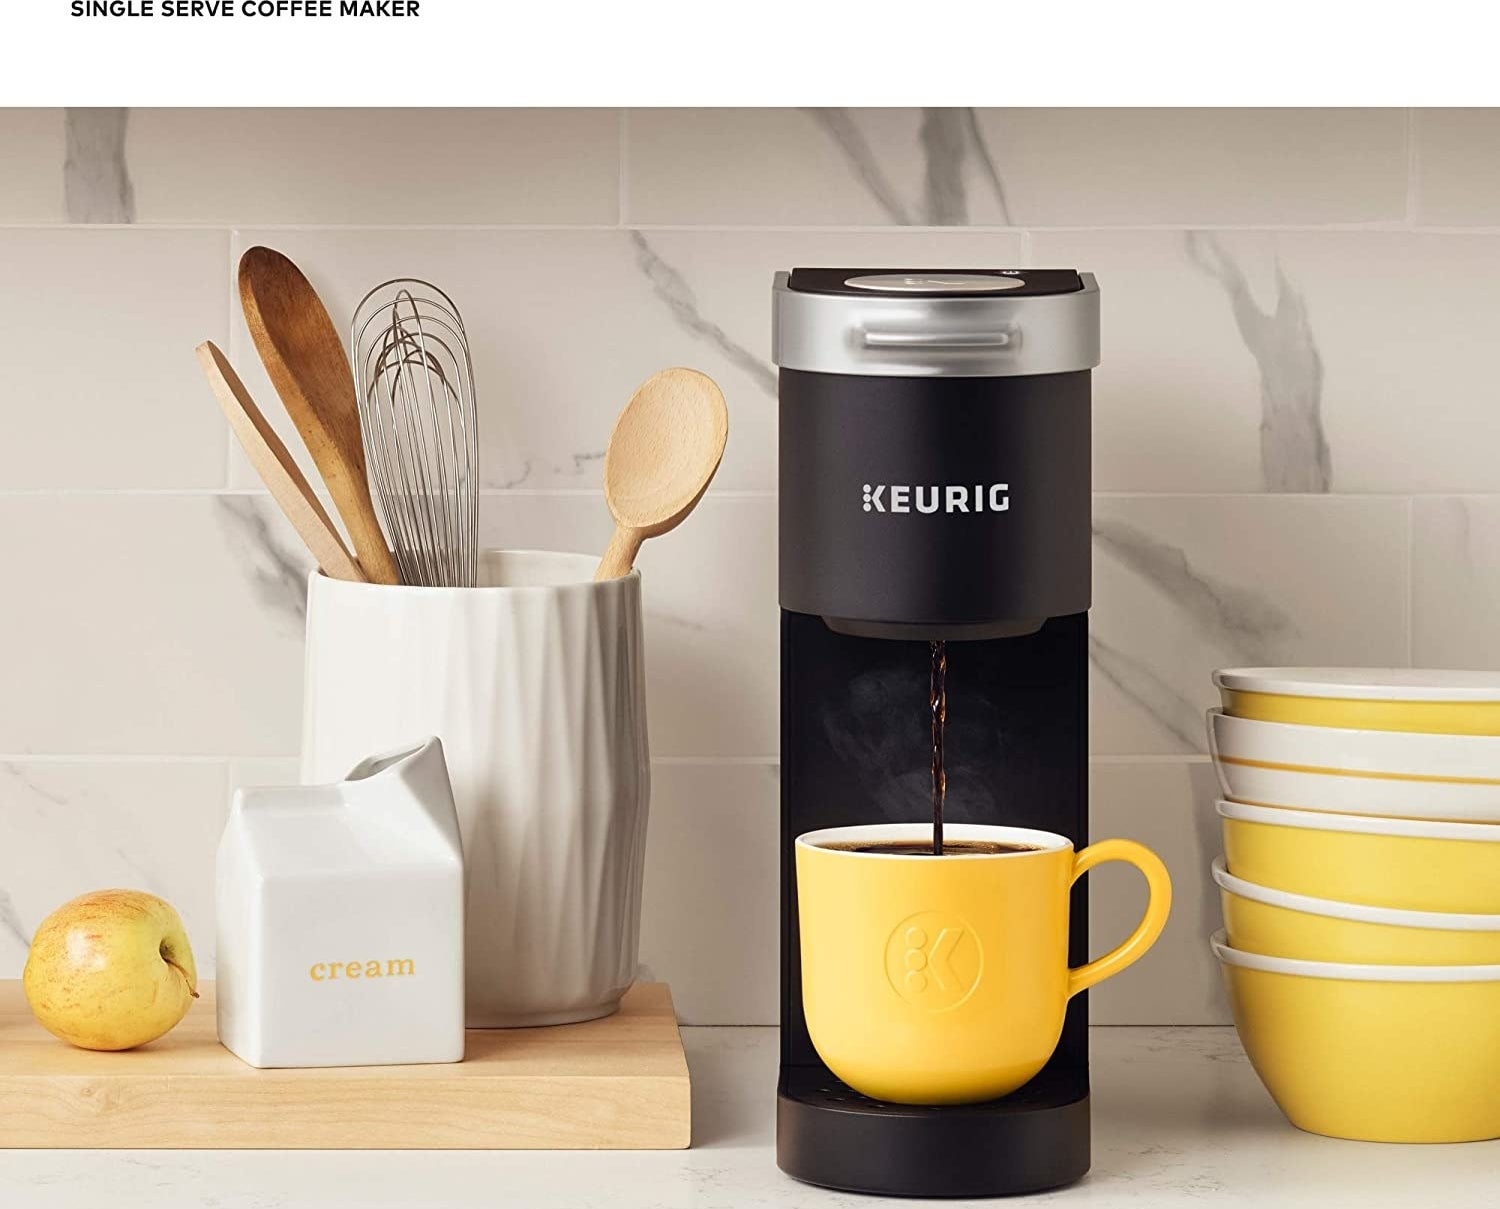 24 Kitchen Products For People Who Live Alone